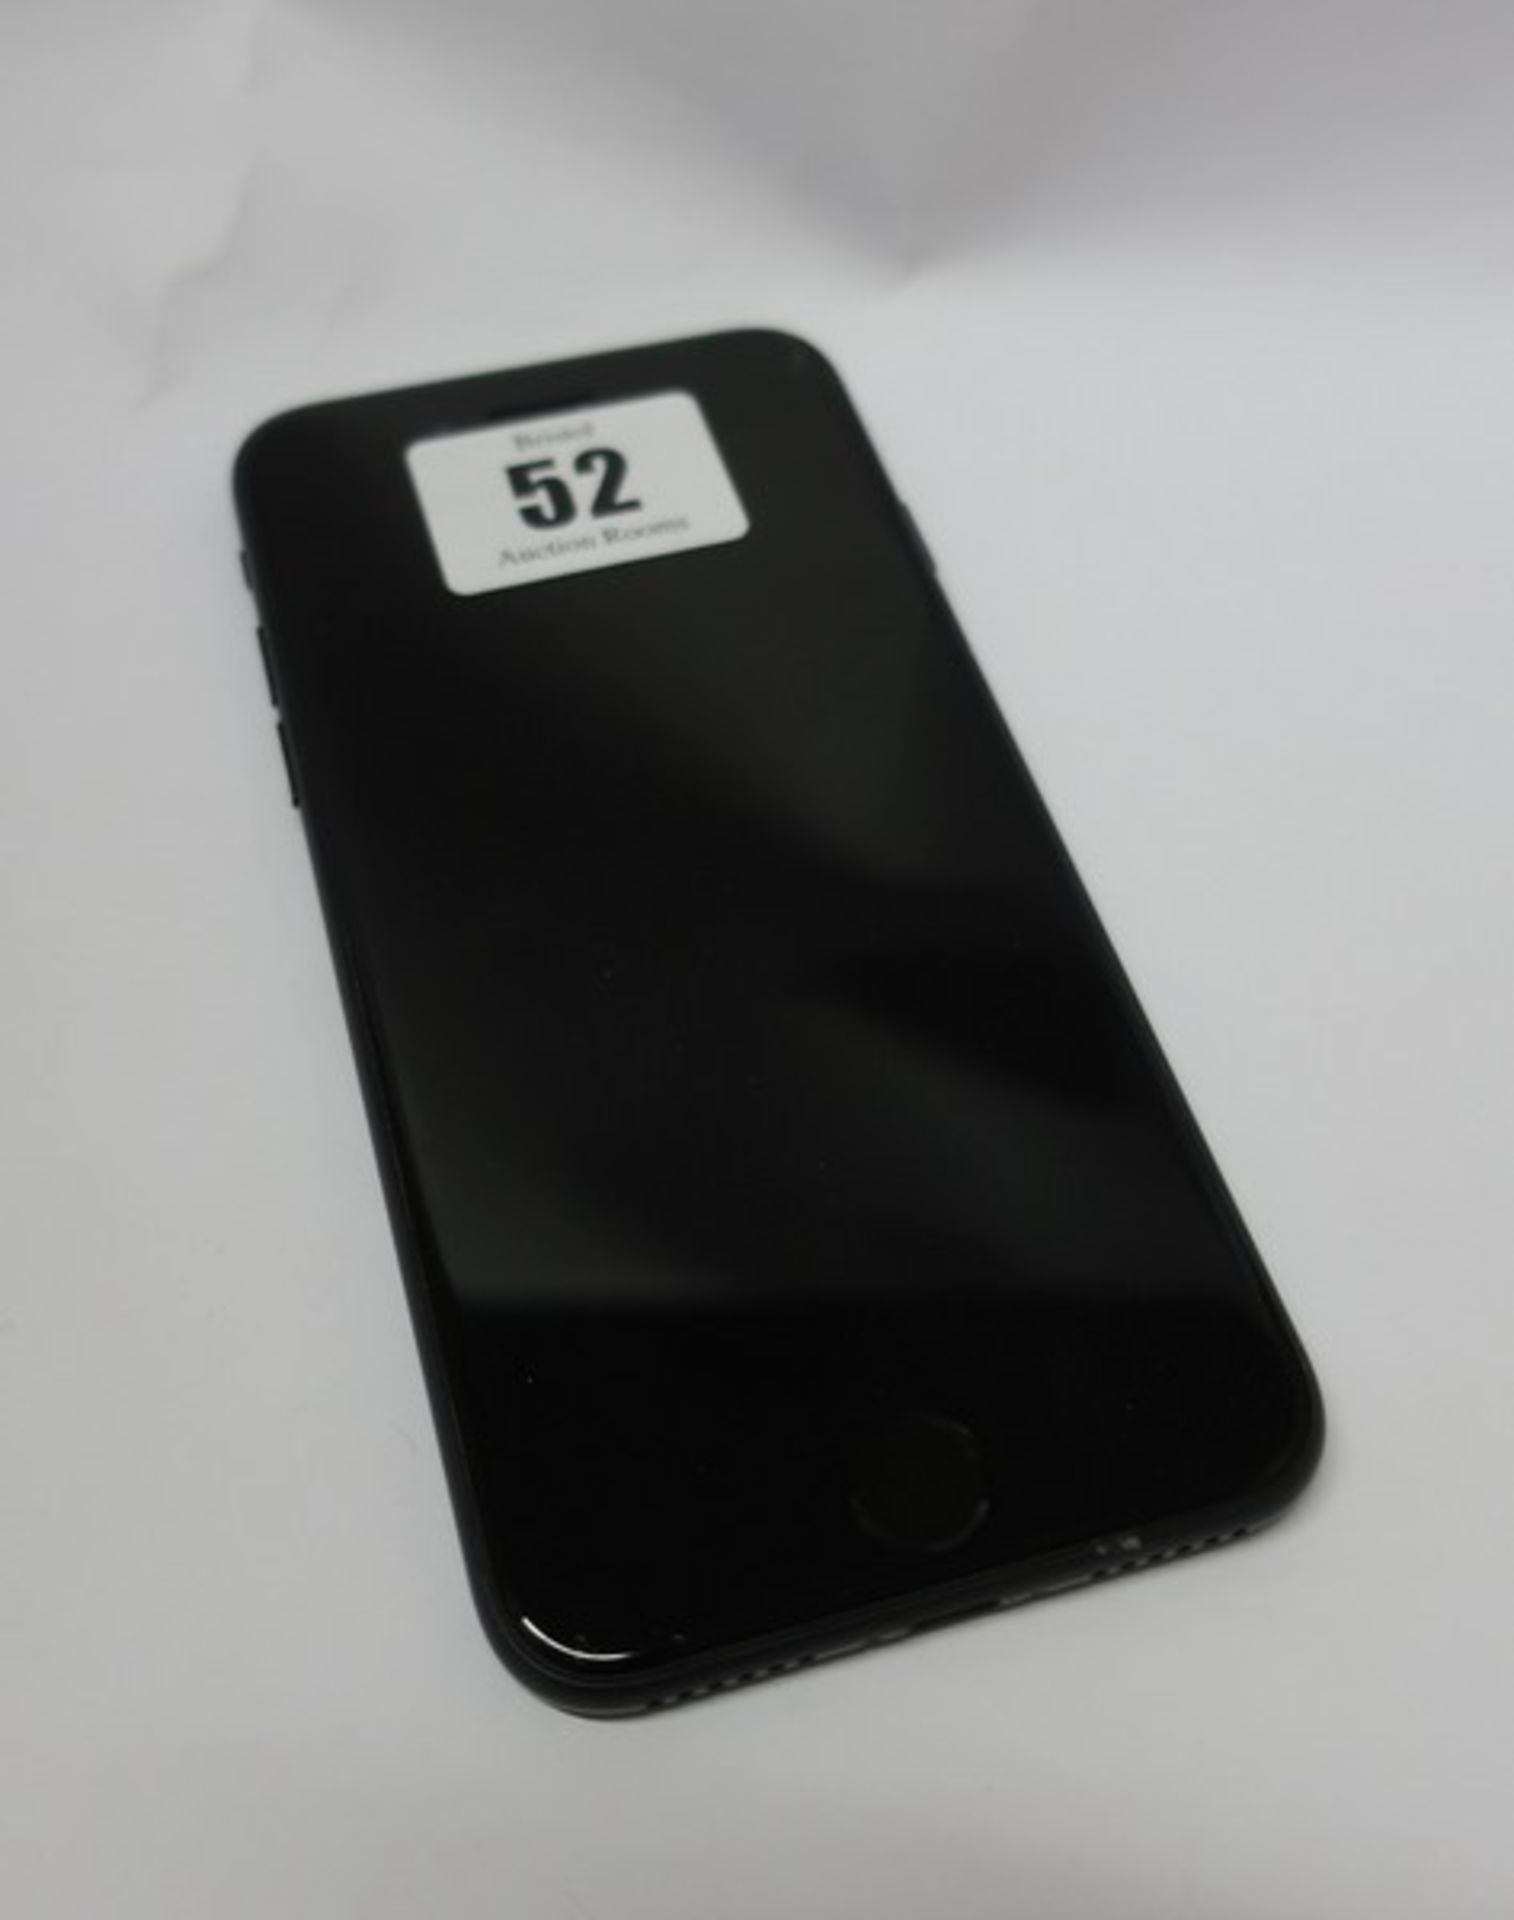 An Apple iPhone 7 32GB A1778 in Black (IMEI: 354828090170750) (Activation clear) (Damaged screen